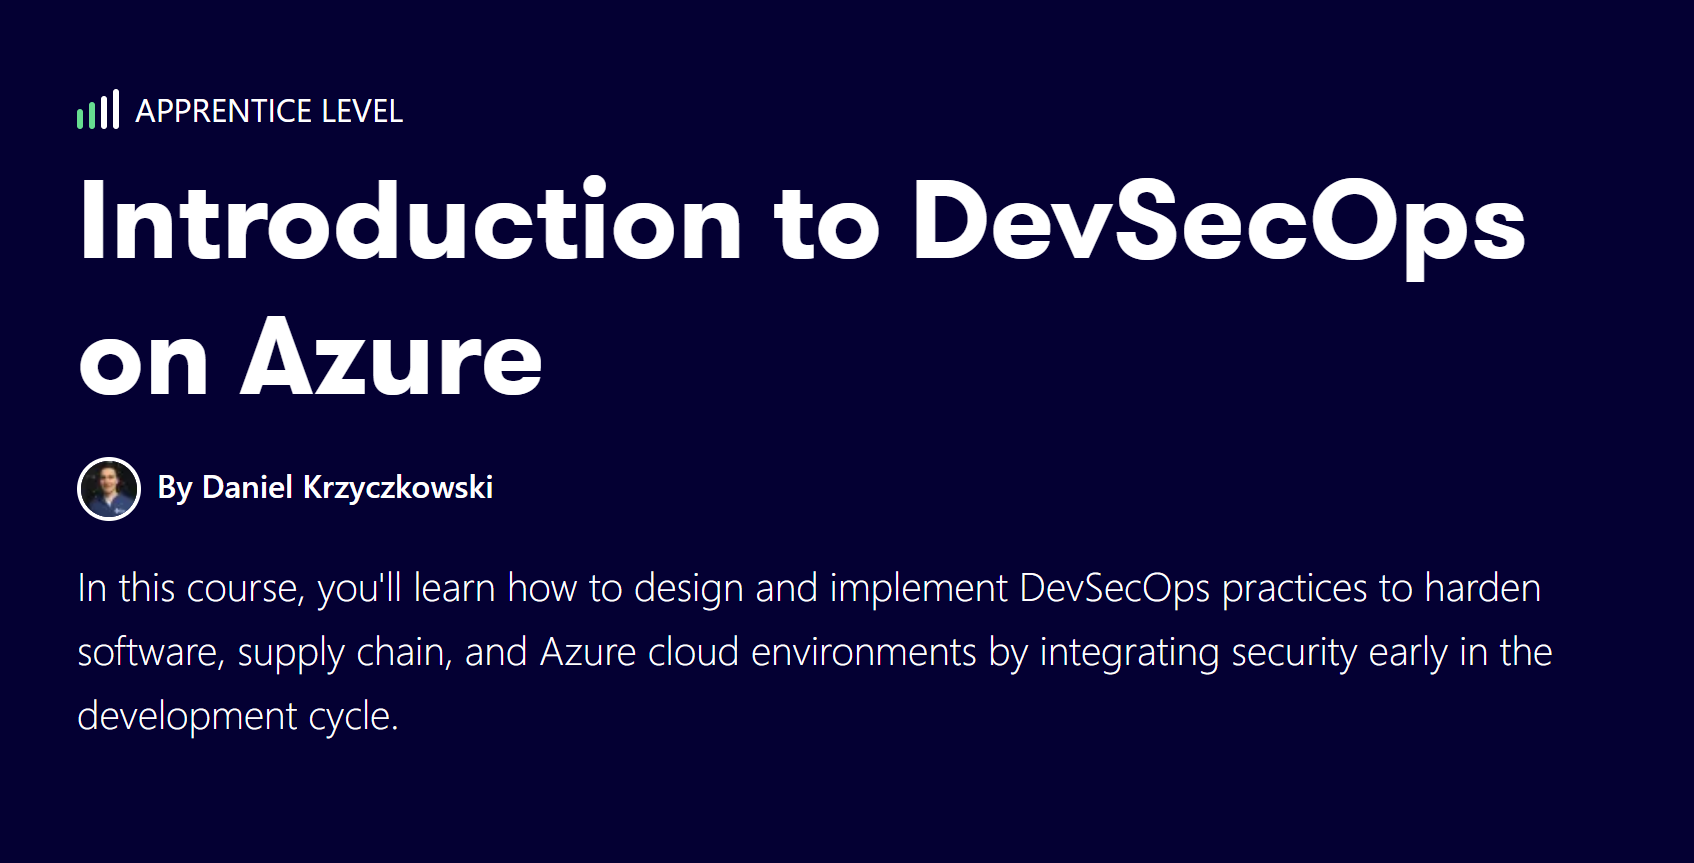 Introduction to DevSecOps on Azure